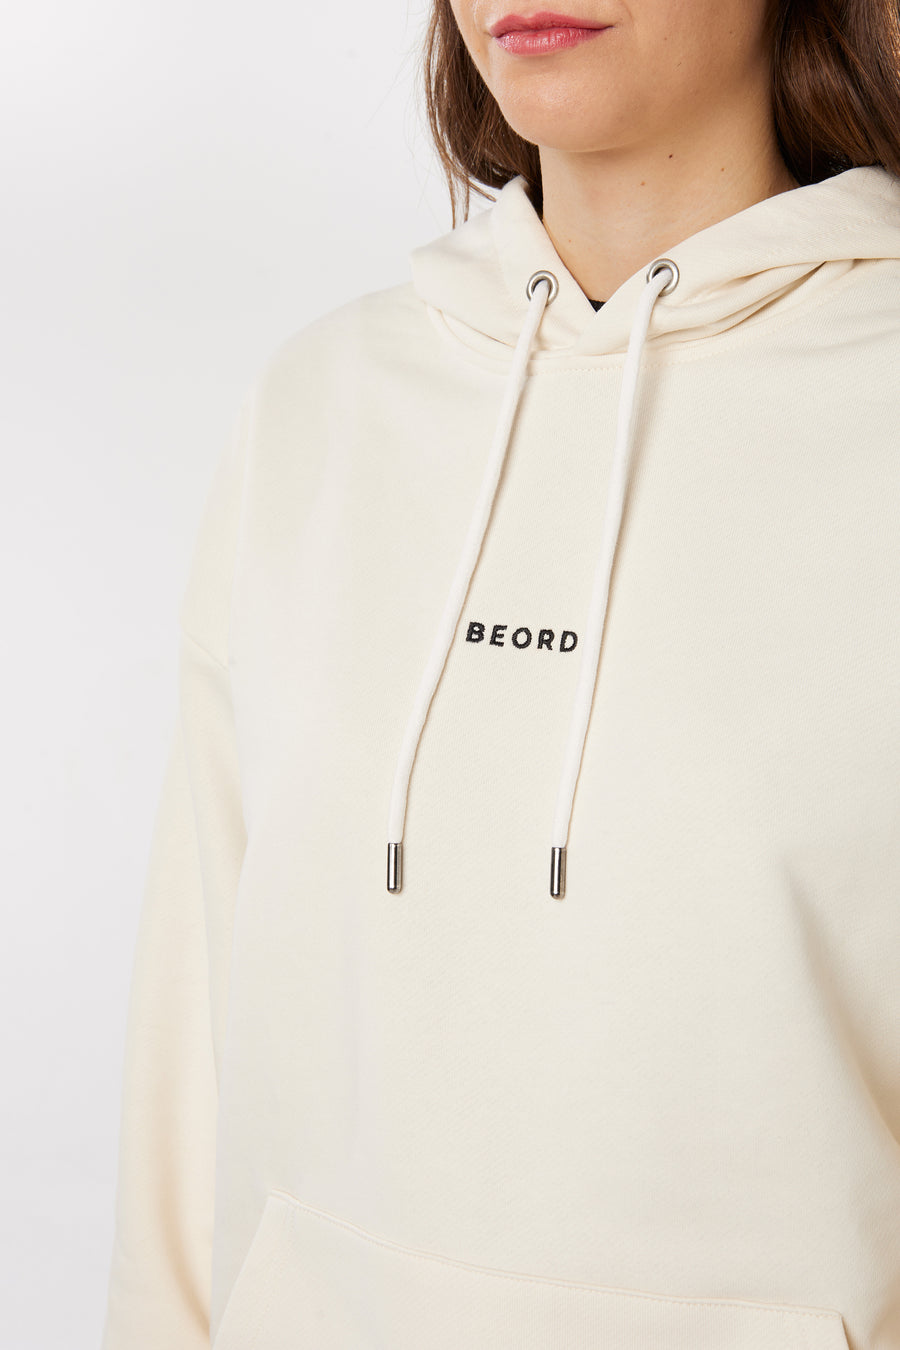 Two People, One Journey Hoodie Off-White